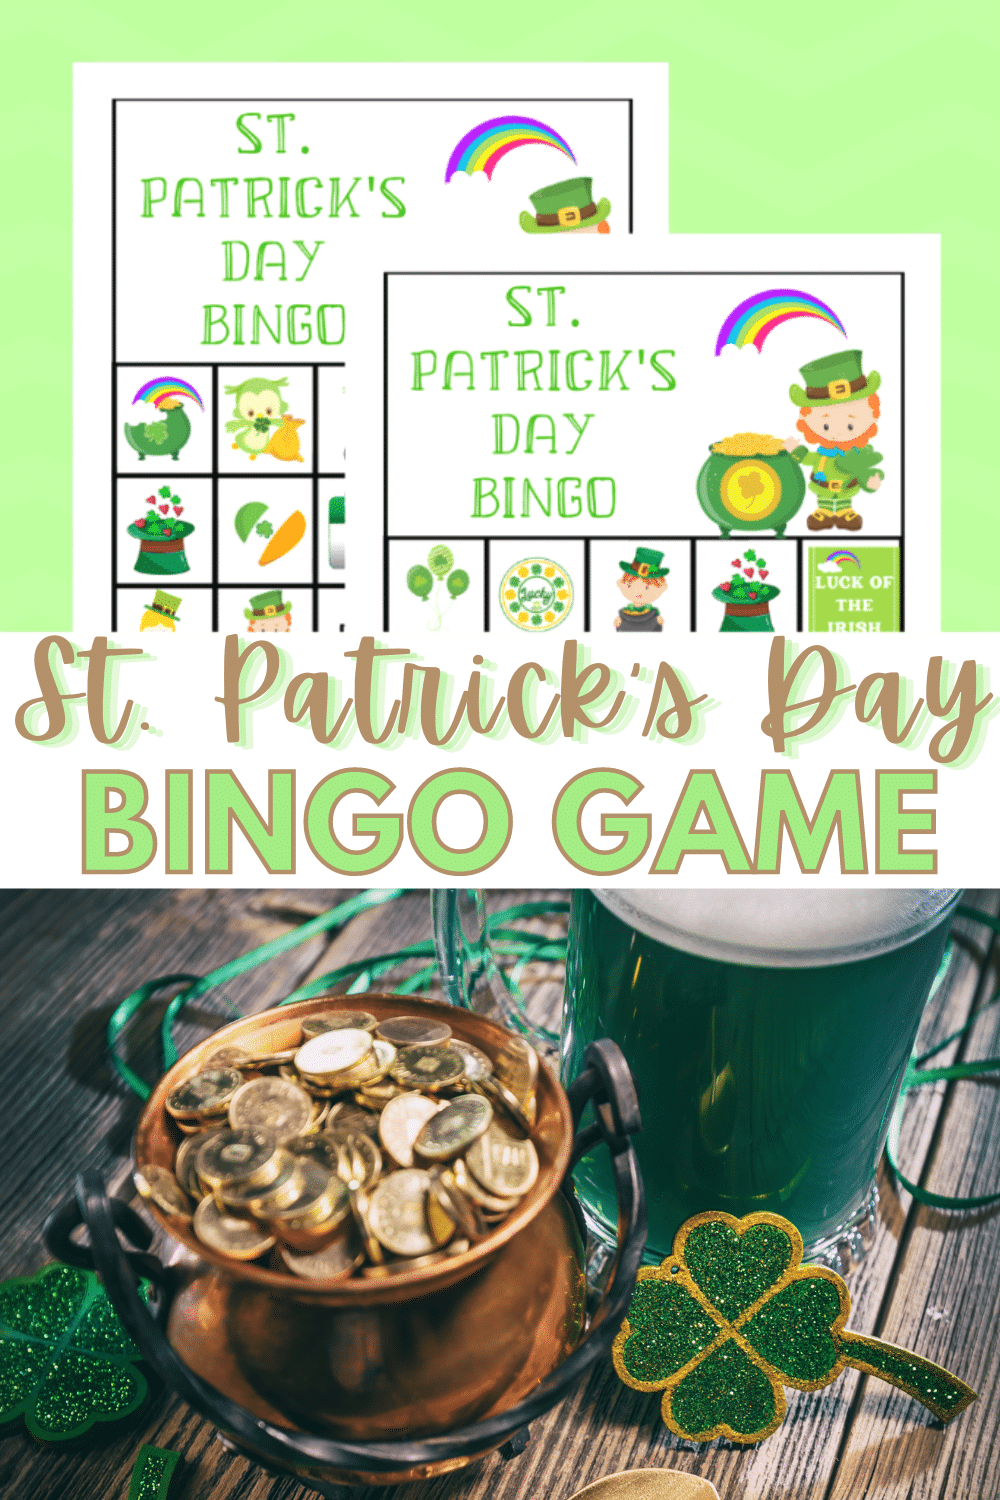 Feeling like trying your luck? The kids are going to love this Free Printable St. Patrick's Day Bingo Game! It's a great family time game! #stpatricksday #bingo #freeprintable #familytime #game via @wondermomwannab